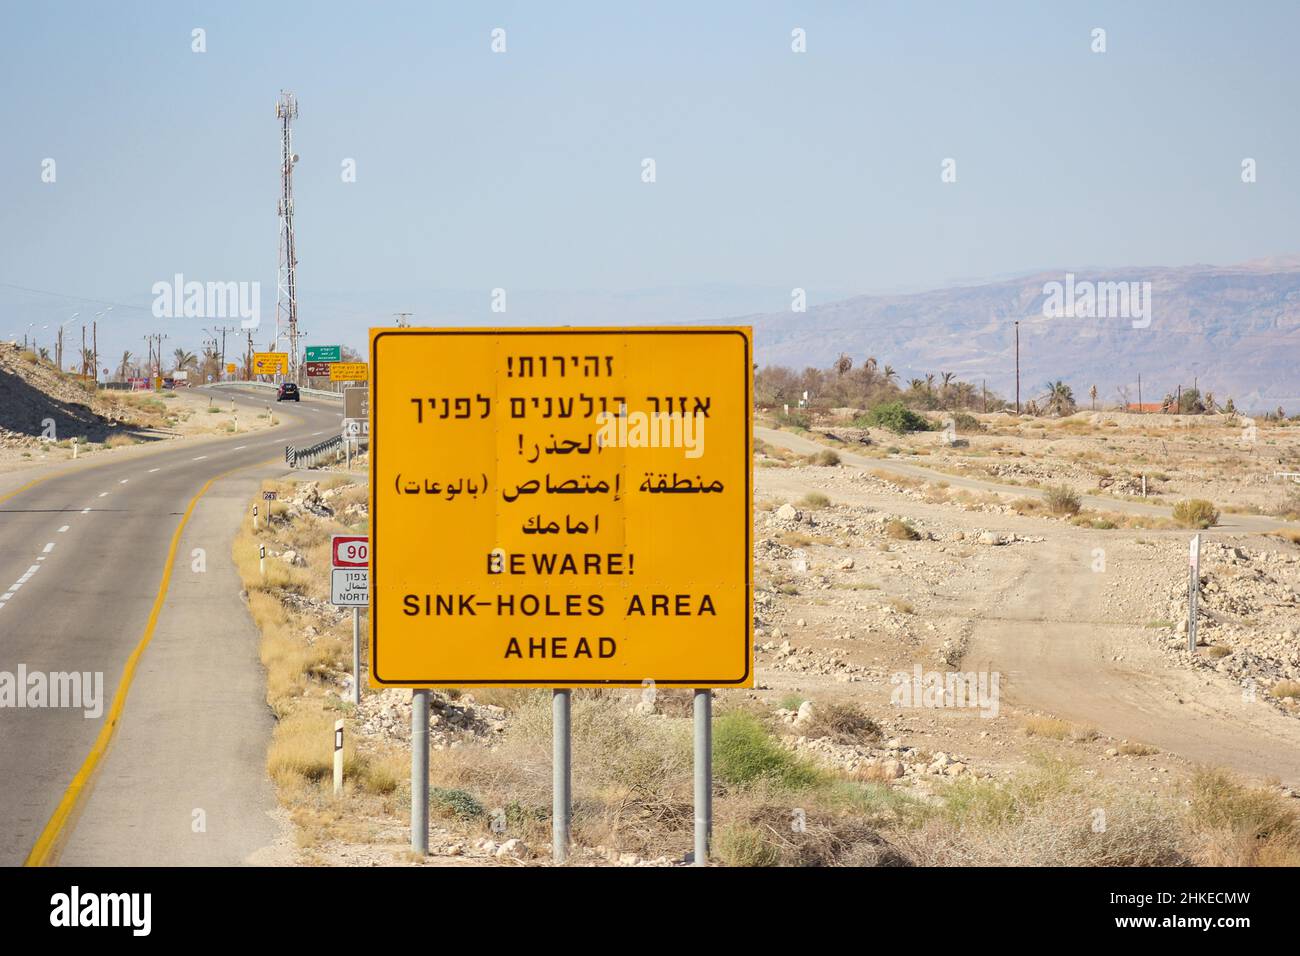 A cautionary trilingual sign along Israeli Highway 90 warns of sink-holes in this area of the Judean Desert near the Dead Sea in the West Bank. Stock Photo